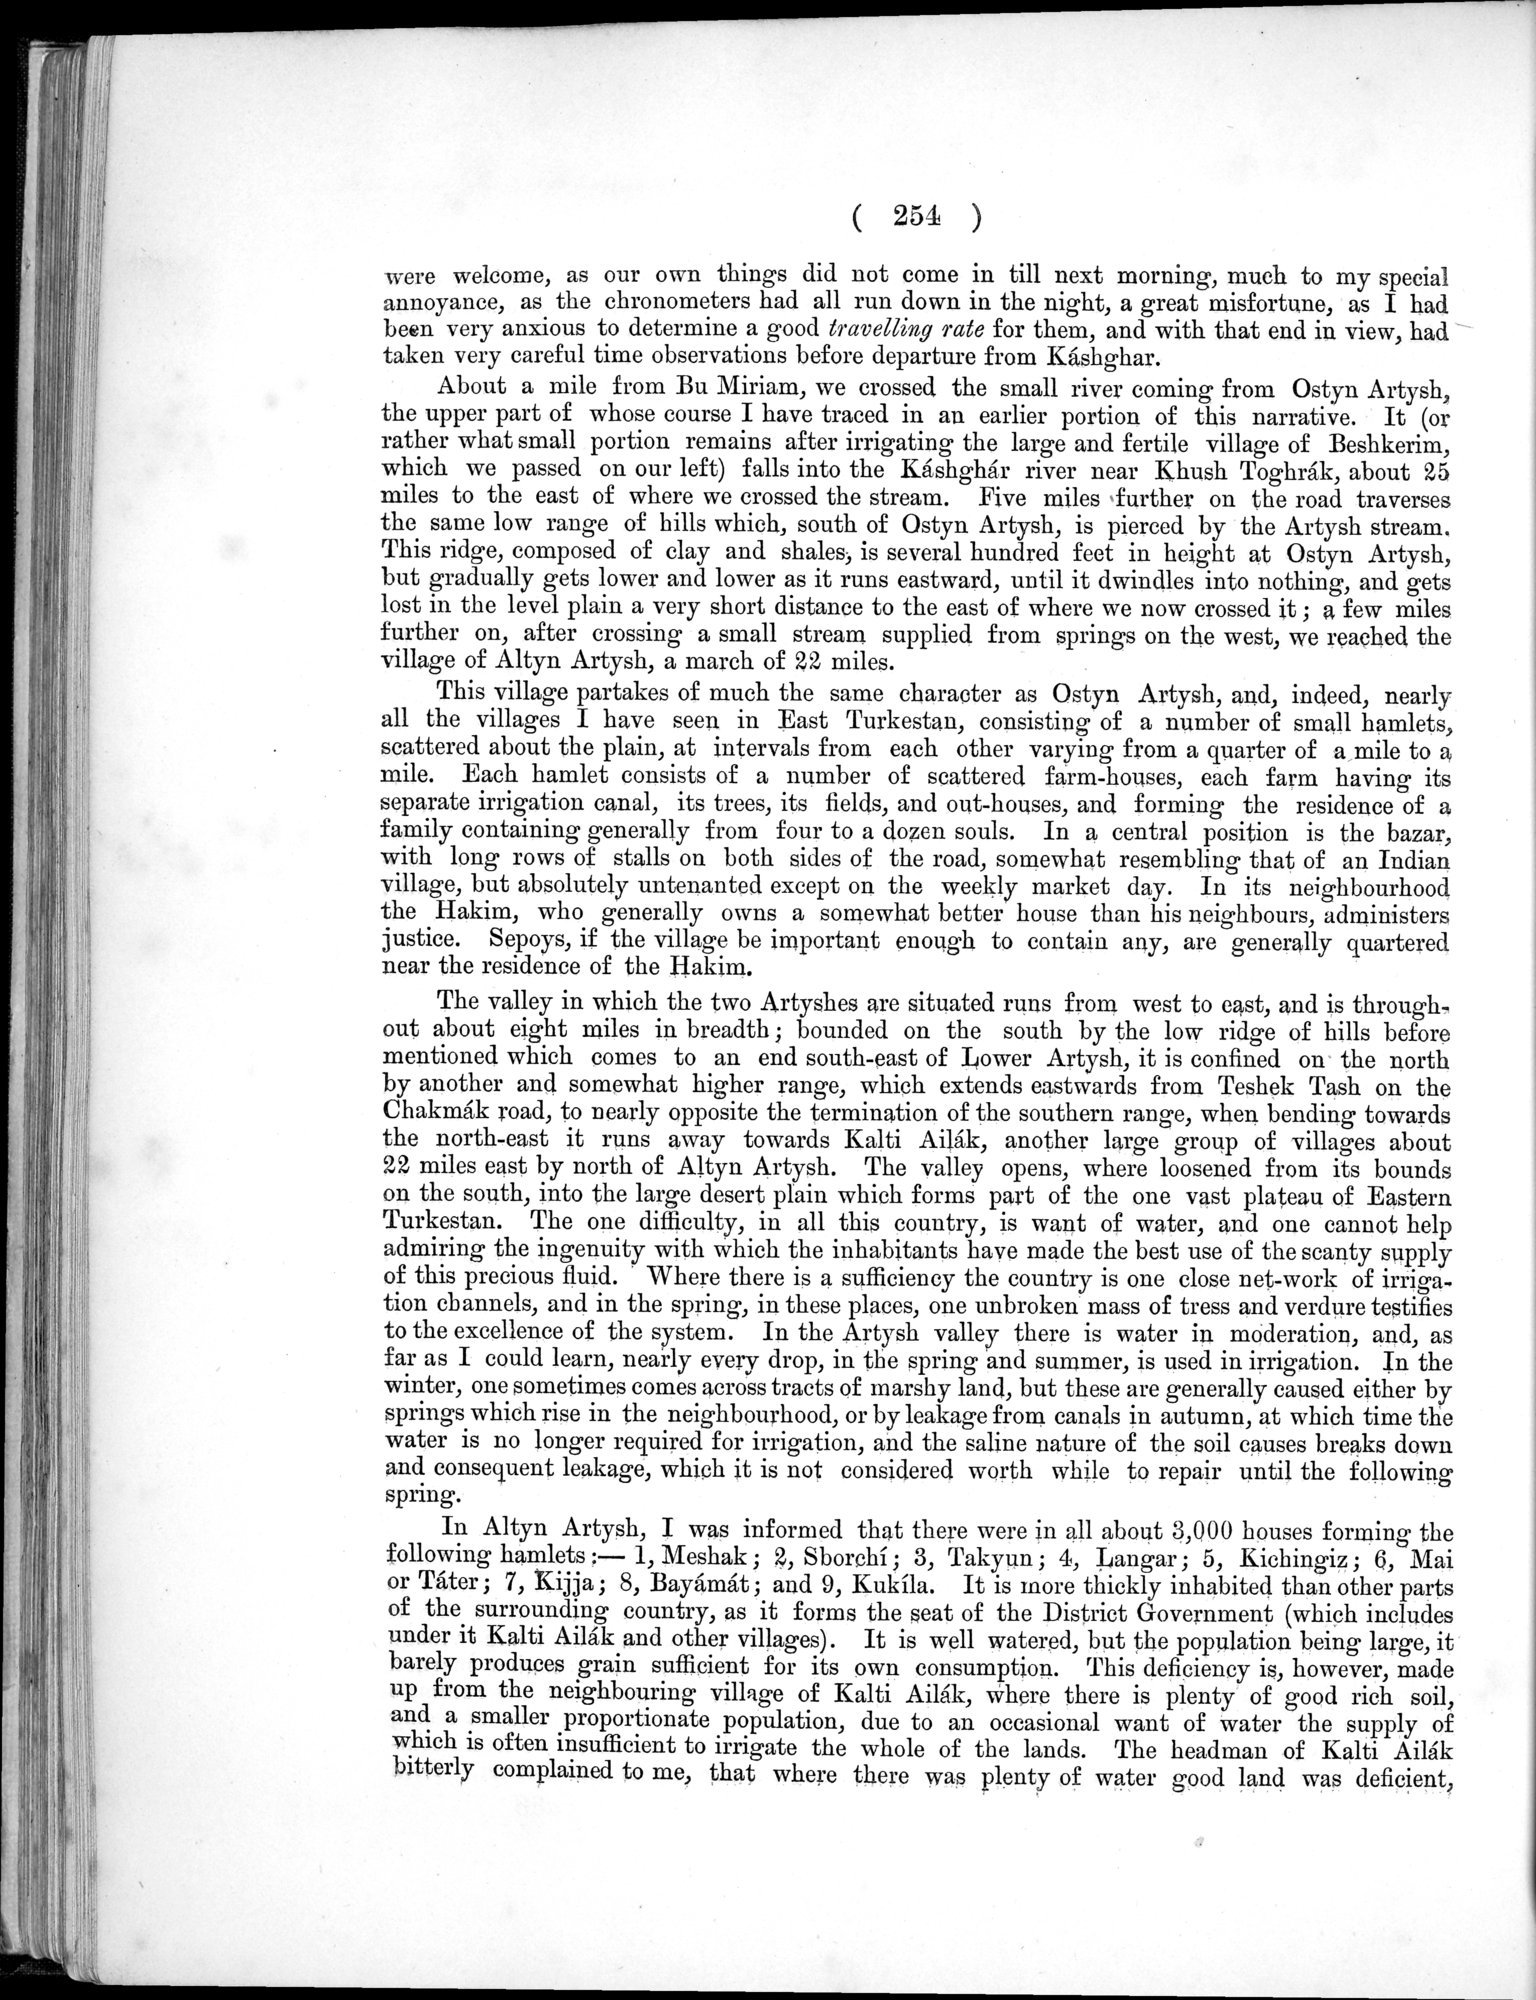 Report of a Mission to Yarkund in 1873 : vol.1 / Page 368 (Grayscale High Resolution Image)